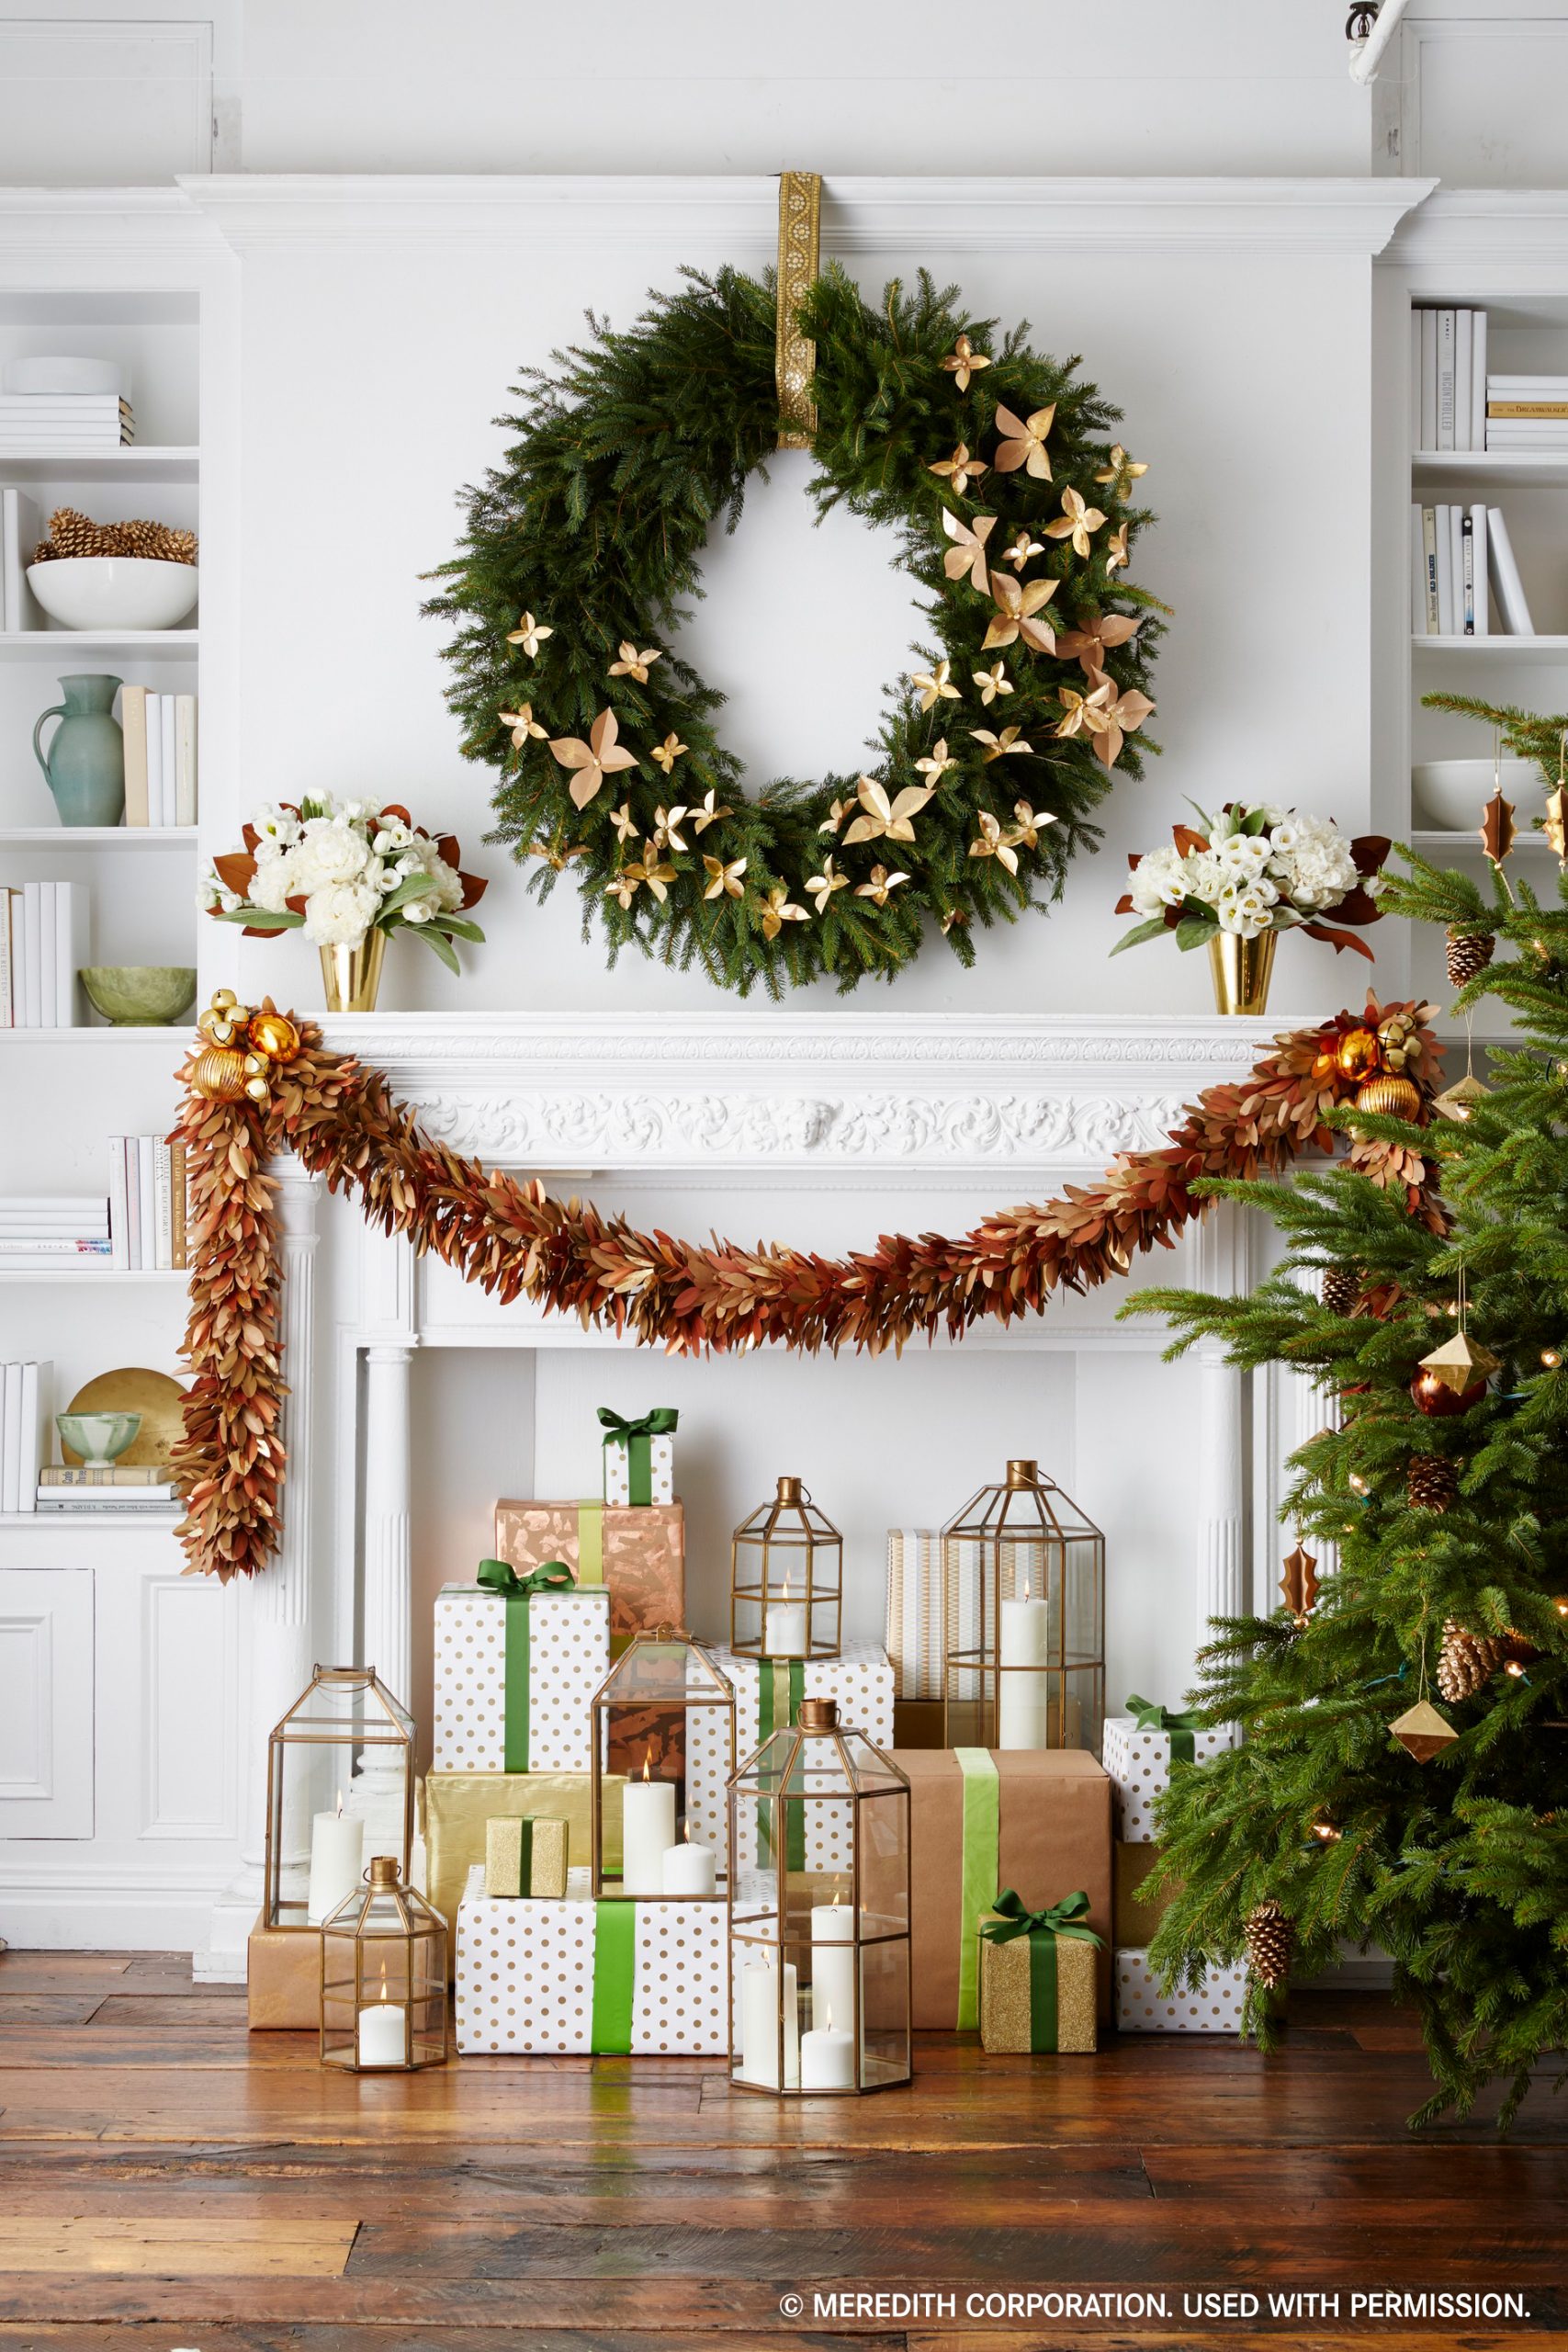 Bright Home interior decorated for holidays with wreath, presents and tree